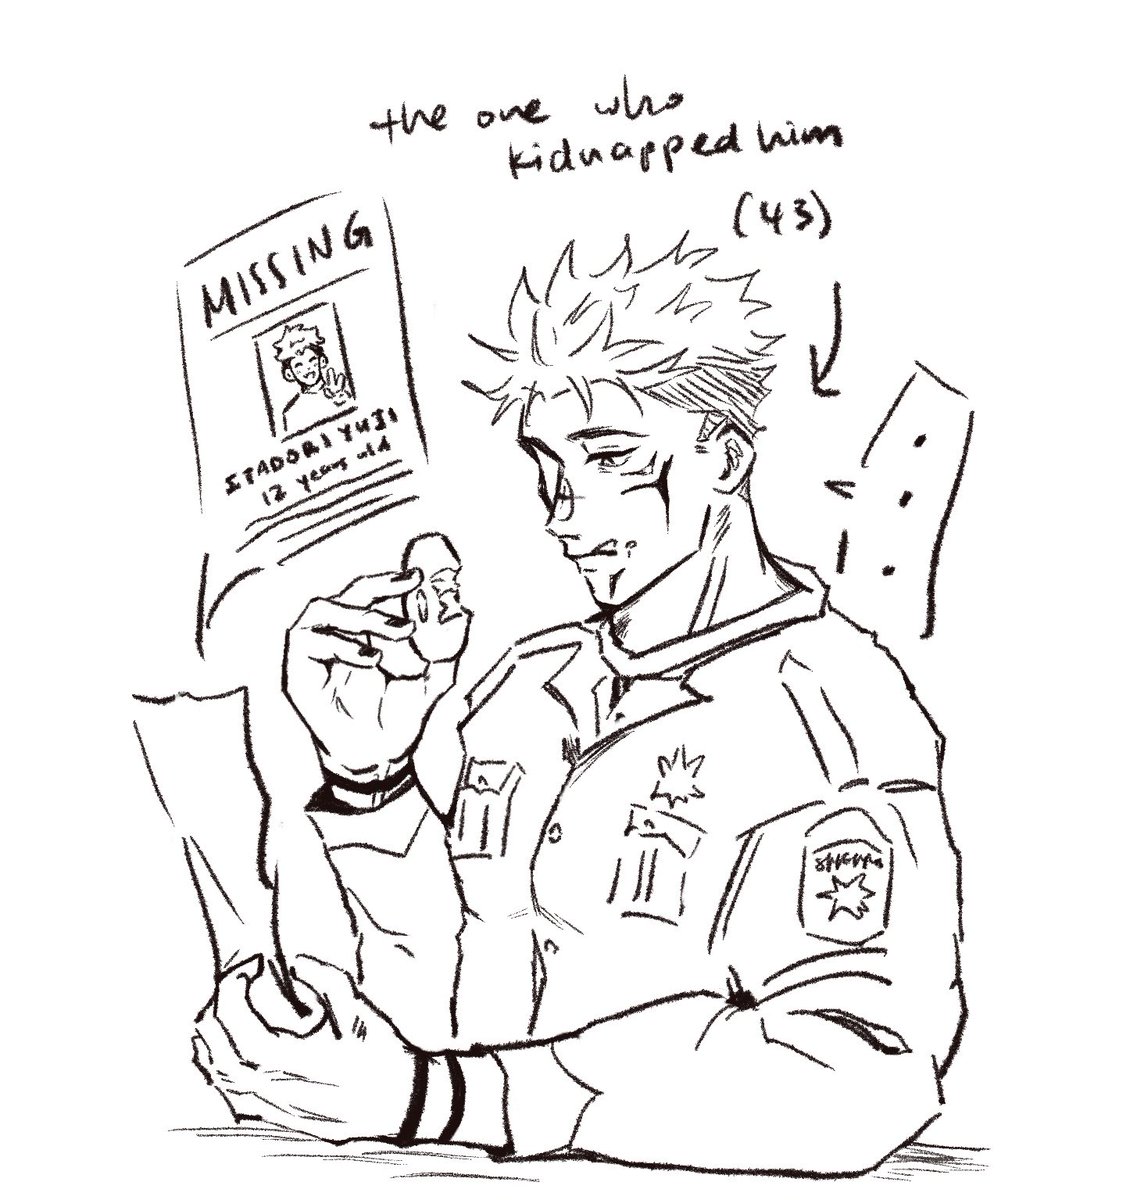 officer sukuna who’s obsessed with his little nephew